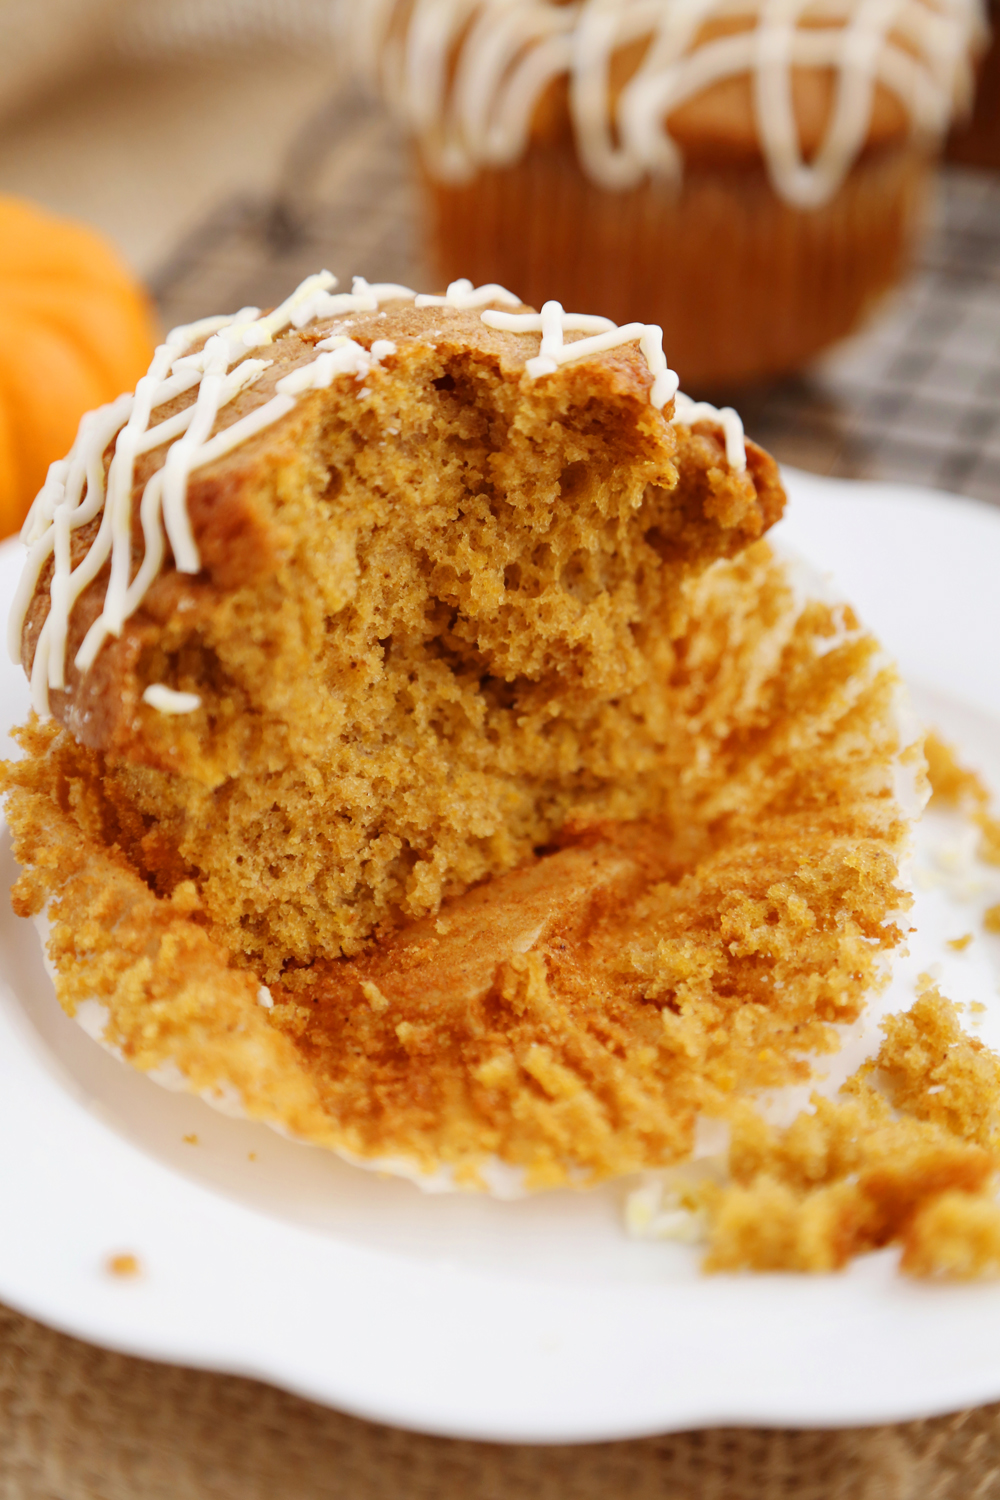 Vanilla Glazed Pumpkin Gingerbread Muffins - Super soft, richly spiced pumpkin muffins made easily in one bowl! So simple, delicious and perfect for homemade gifts. Thecomfortofcooking.com